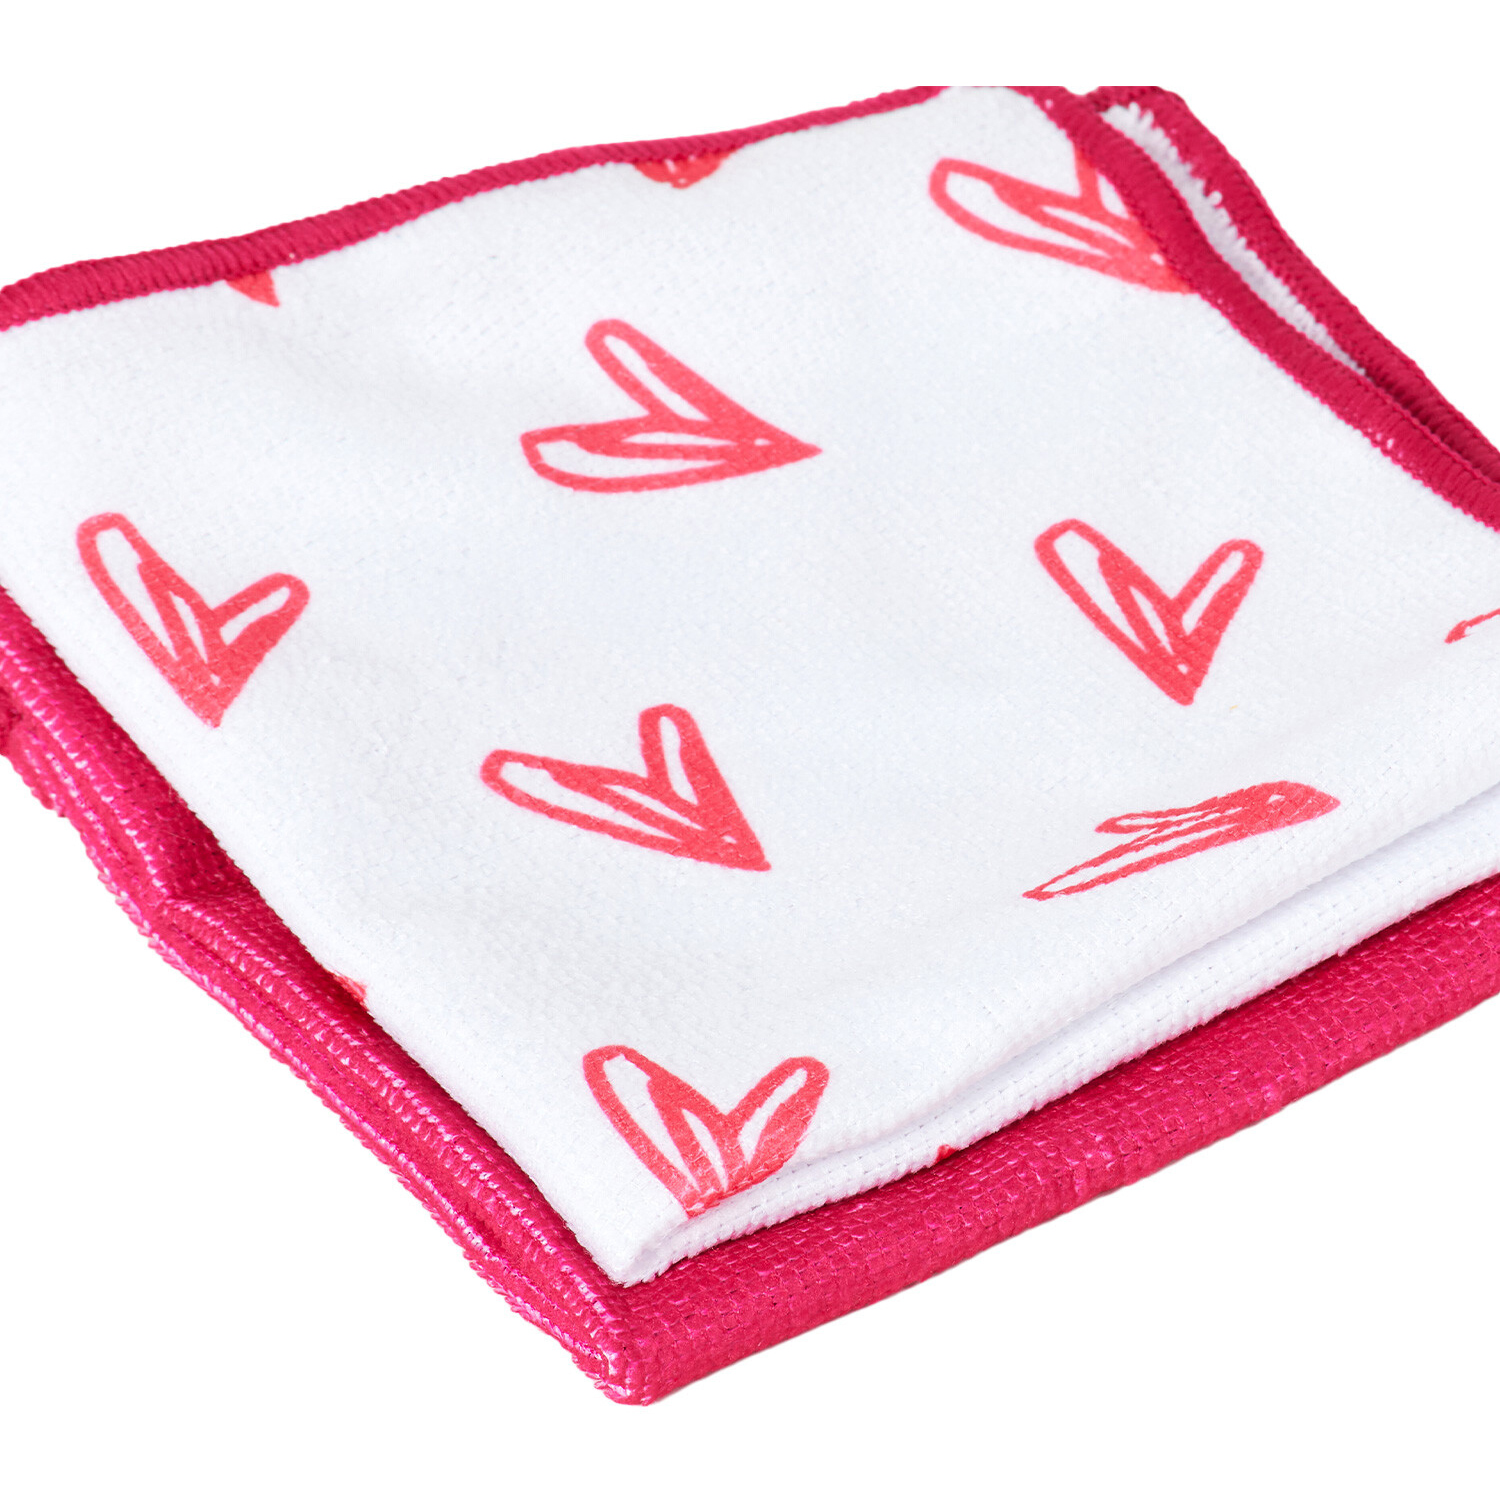 Daisy Pink Microfibre Cloth 3 Pack Image 2